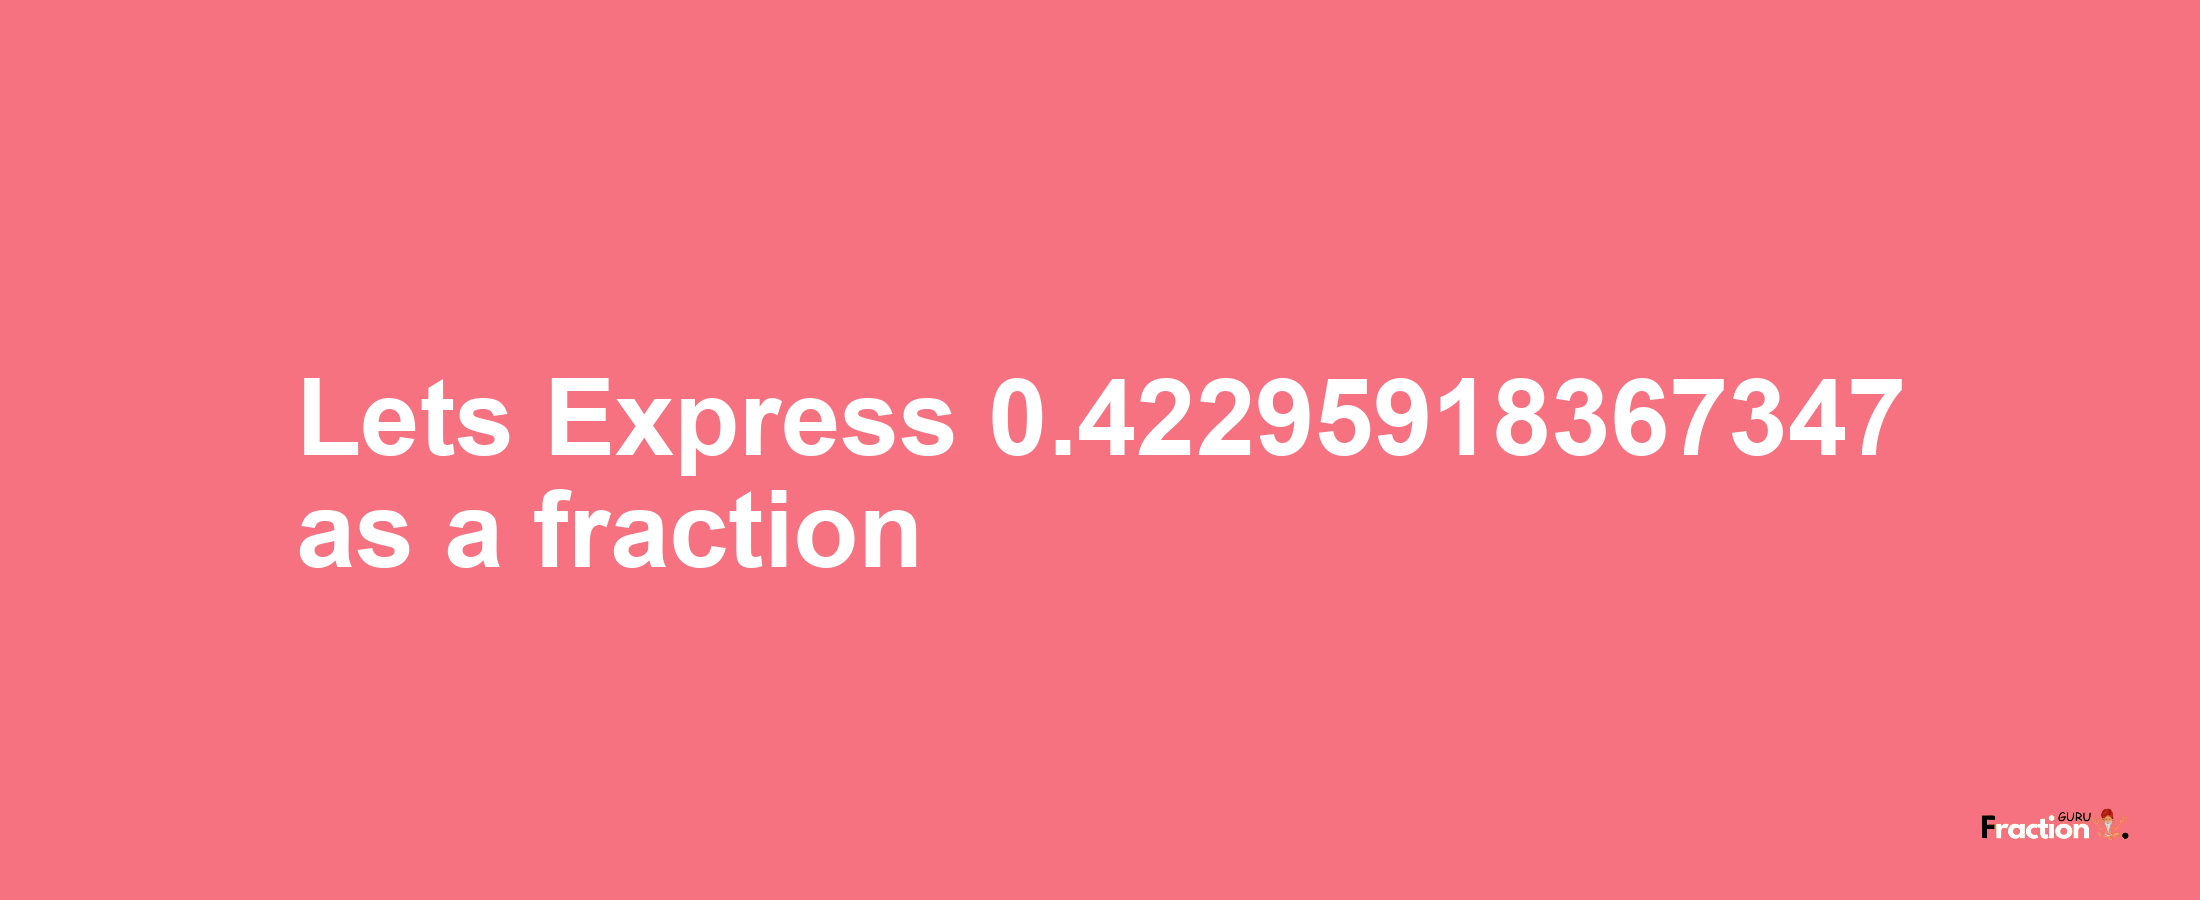 Lets Express 0.42295918367347 as afraction